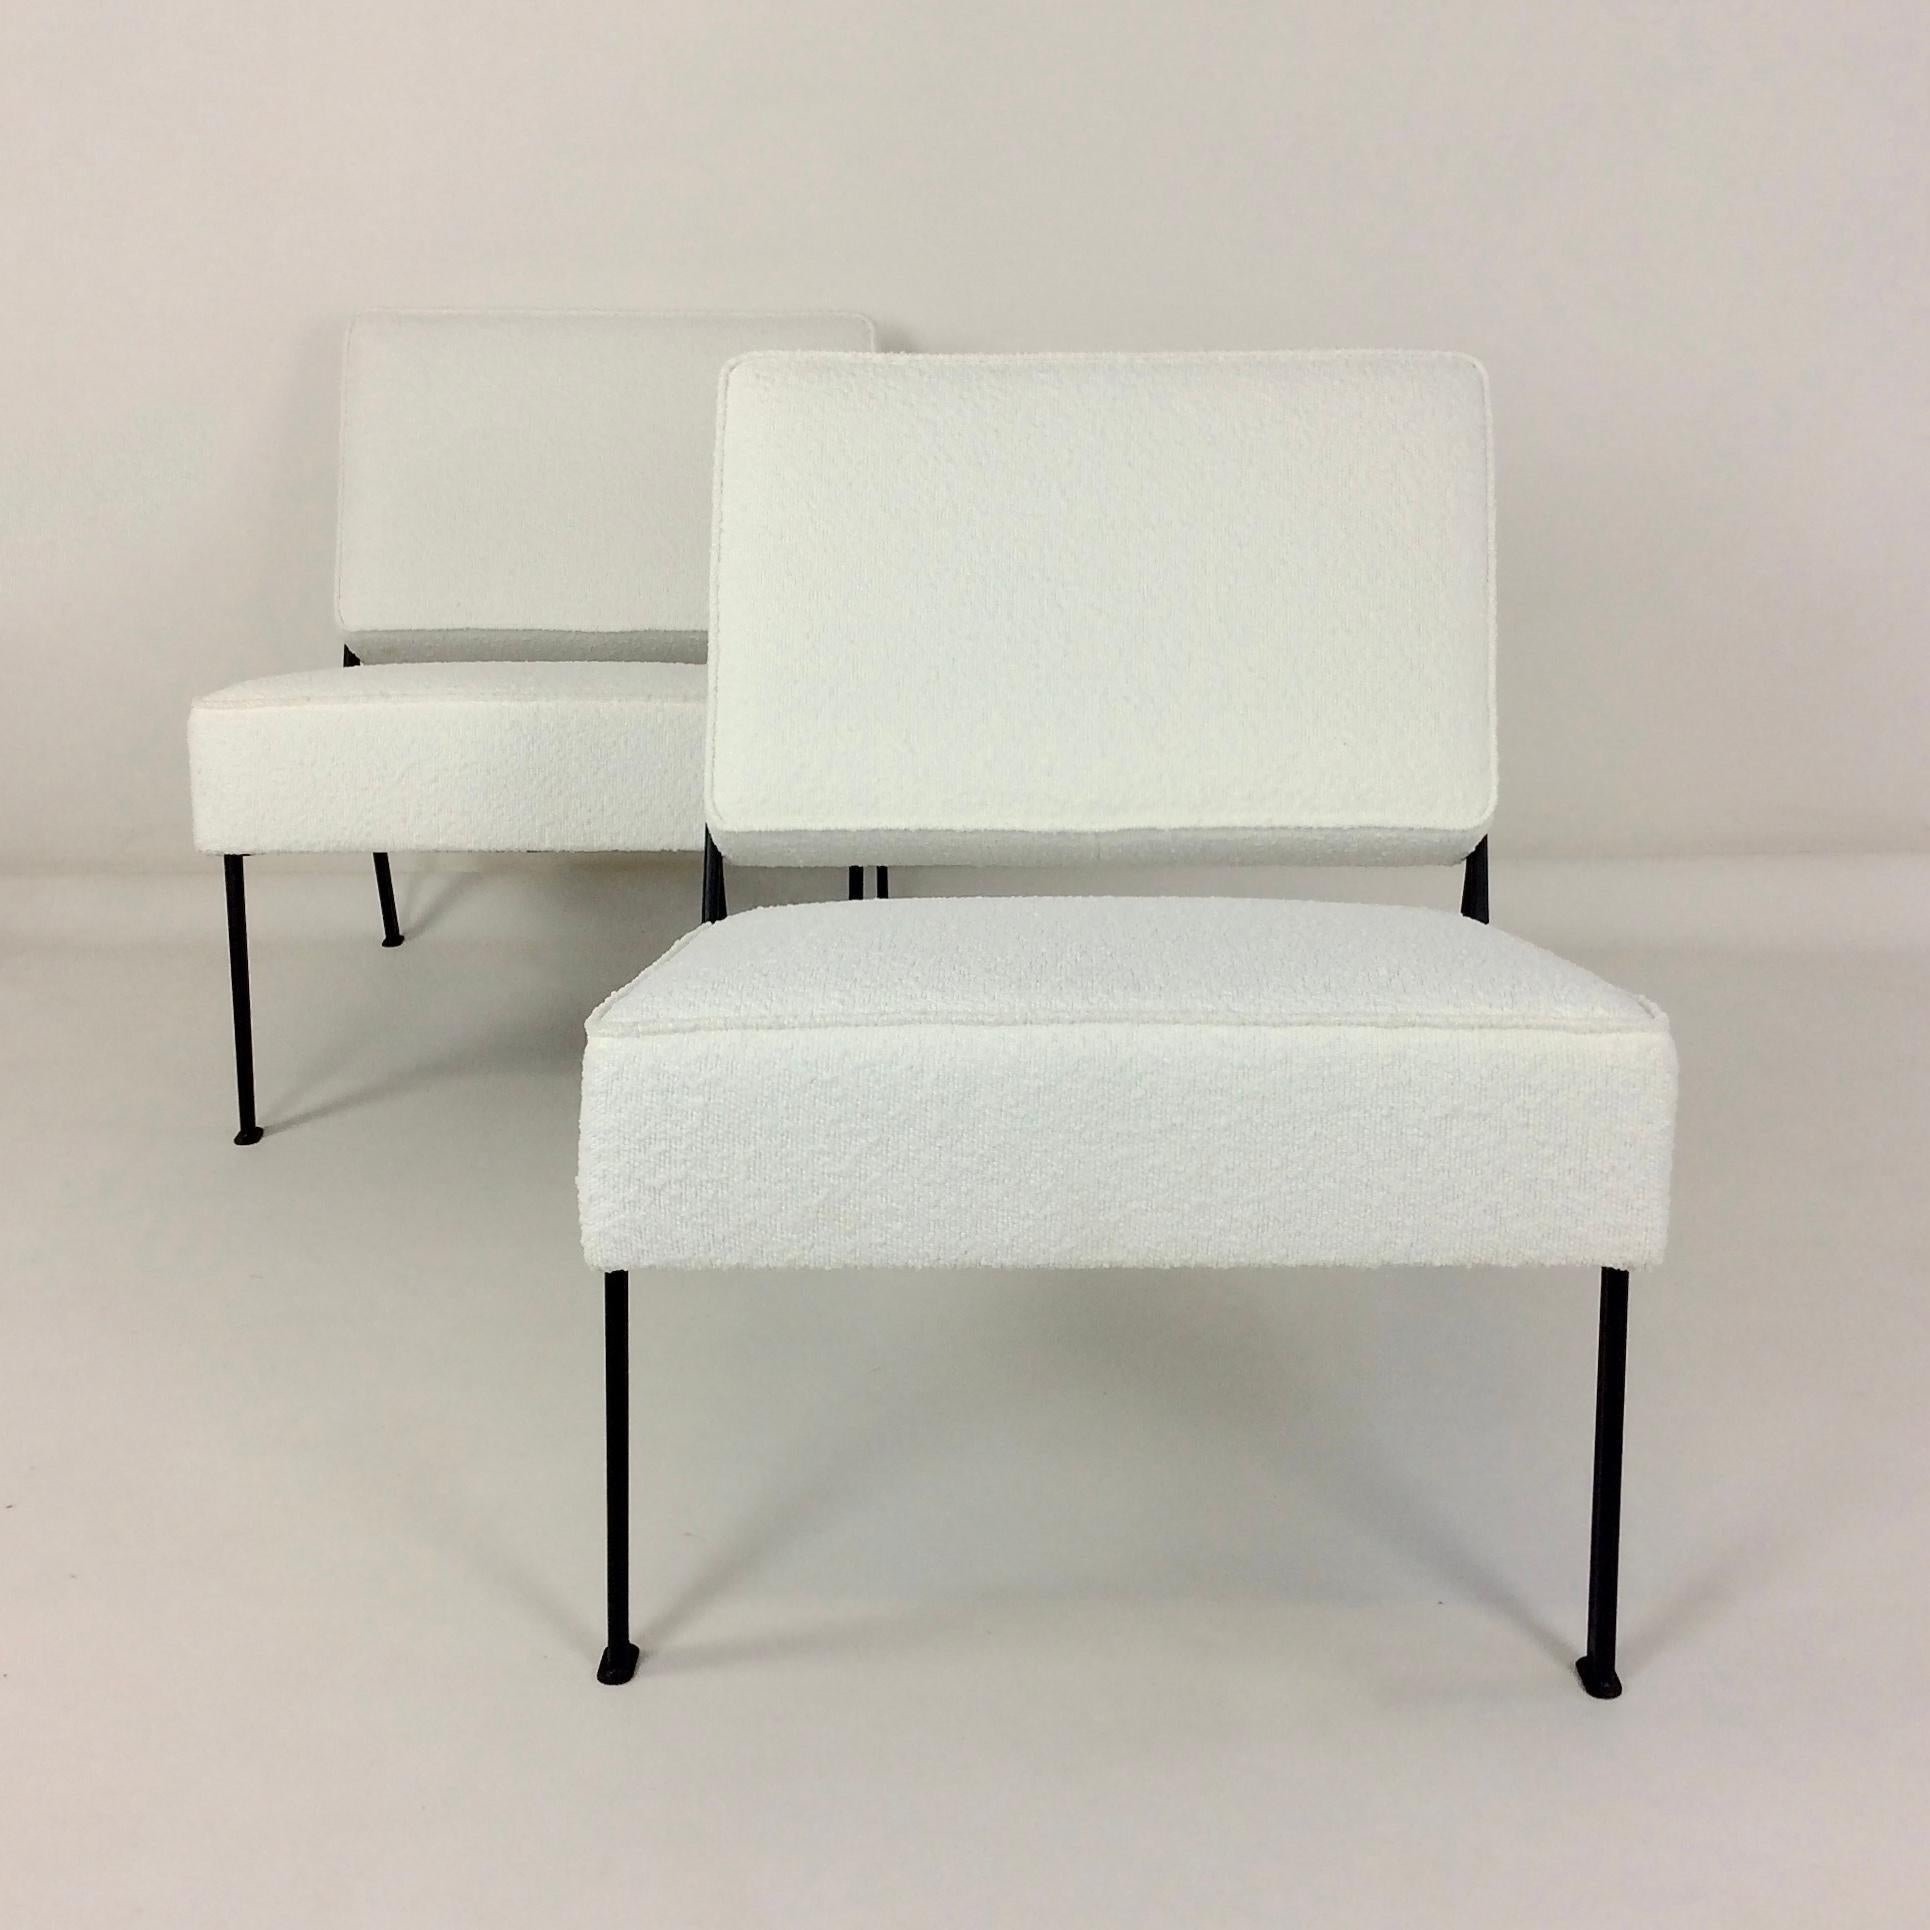 Mid-20th Century Pair of G2 Chairs By A.R.P. Guariche, Motte, Mortier for Airborne, 1953, France.